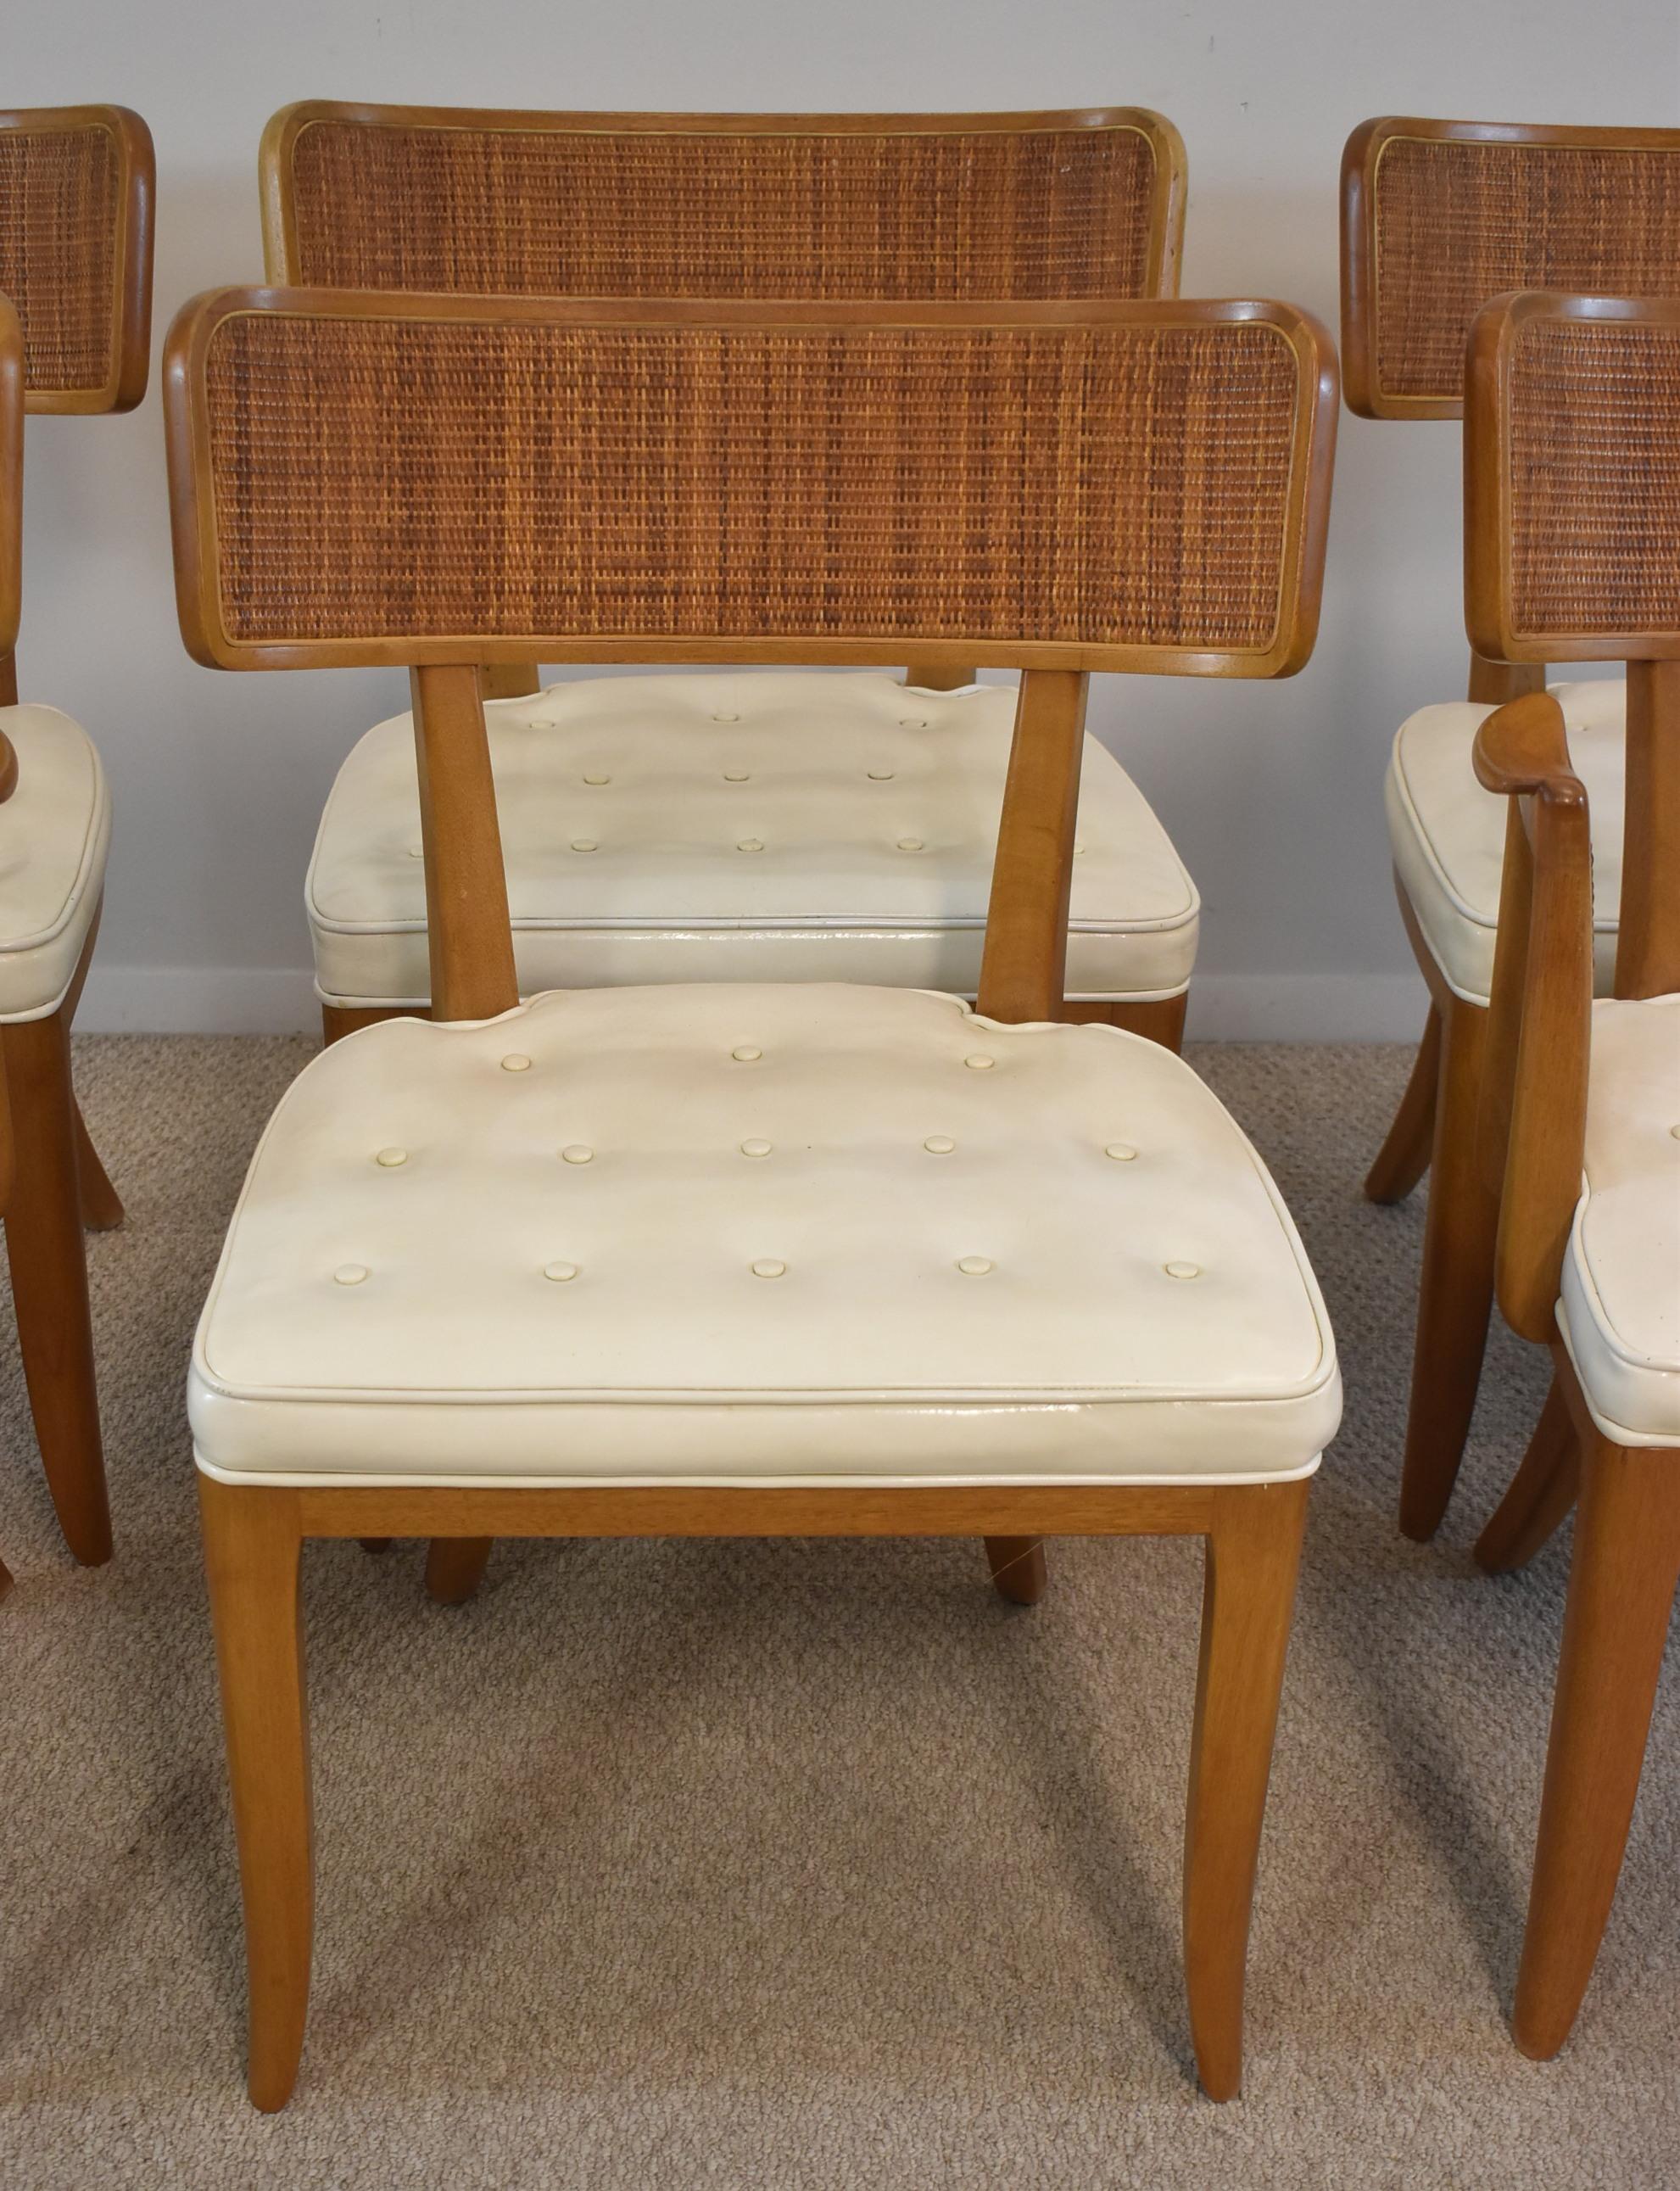 Six vintage Dunbar dining chairs designed by Edward Wormley. Original finish with cane backs. Naugahyde chairs seats. Very solid in very nice Vintage condition consistent with usage and age. Dimensions: 32